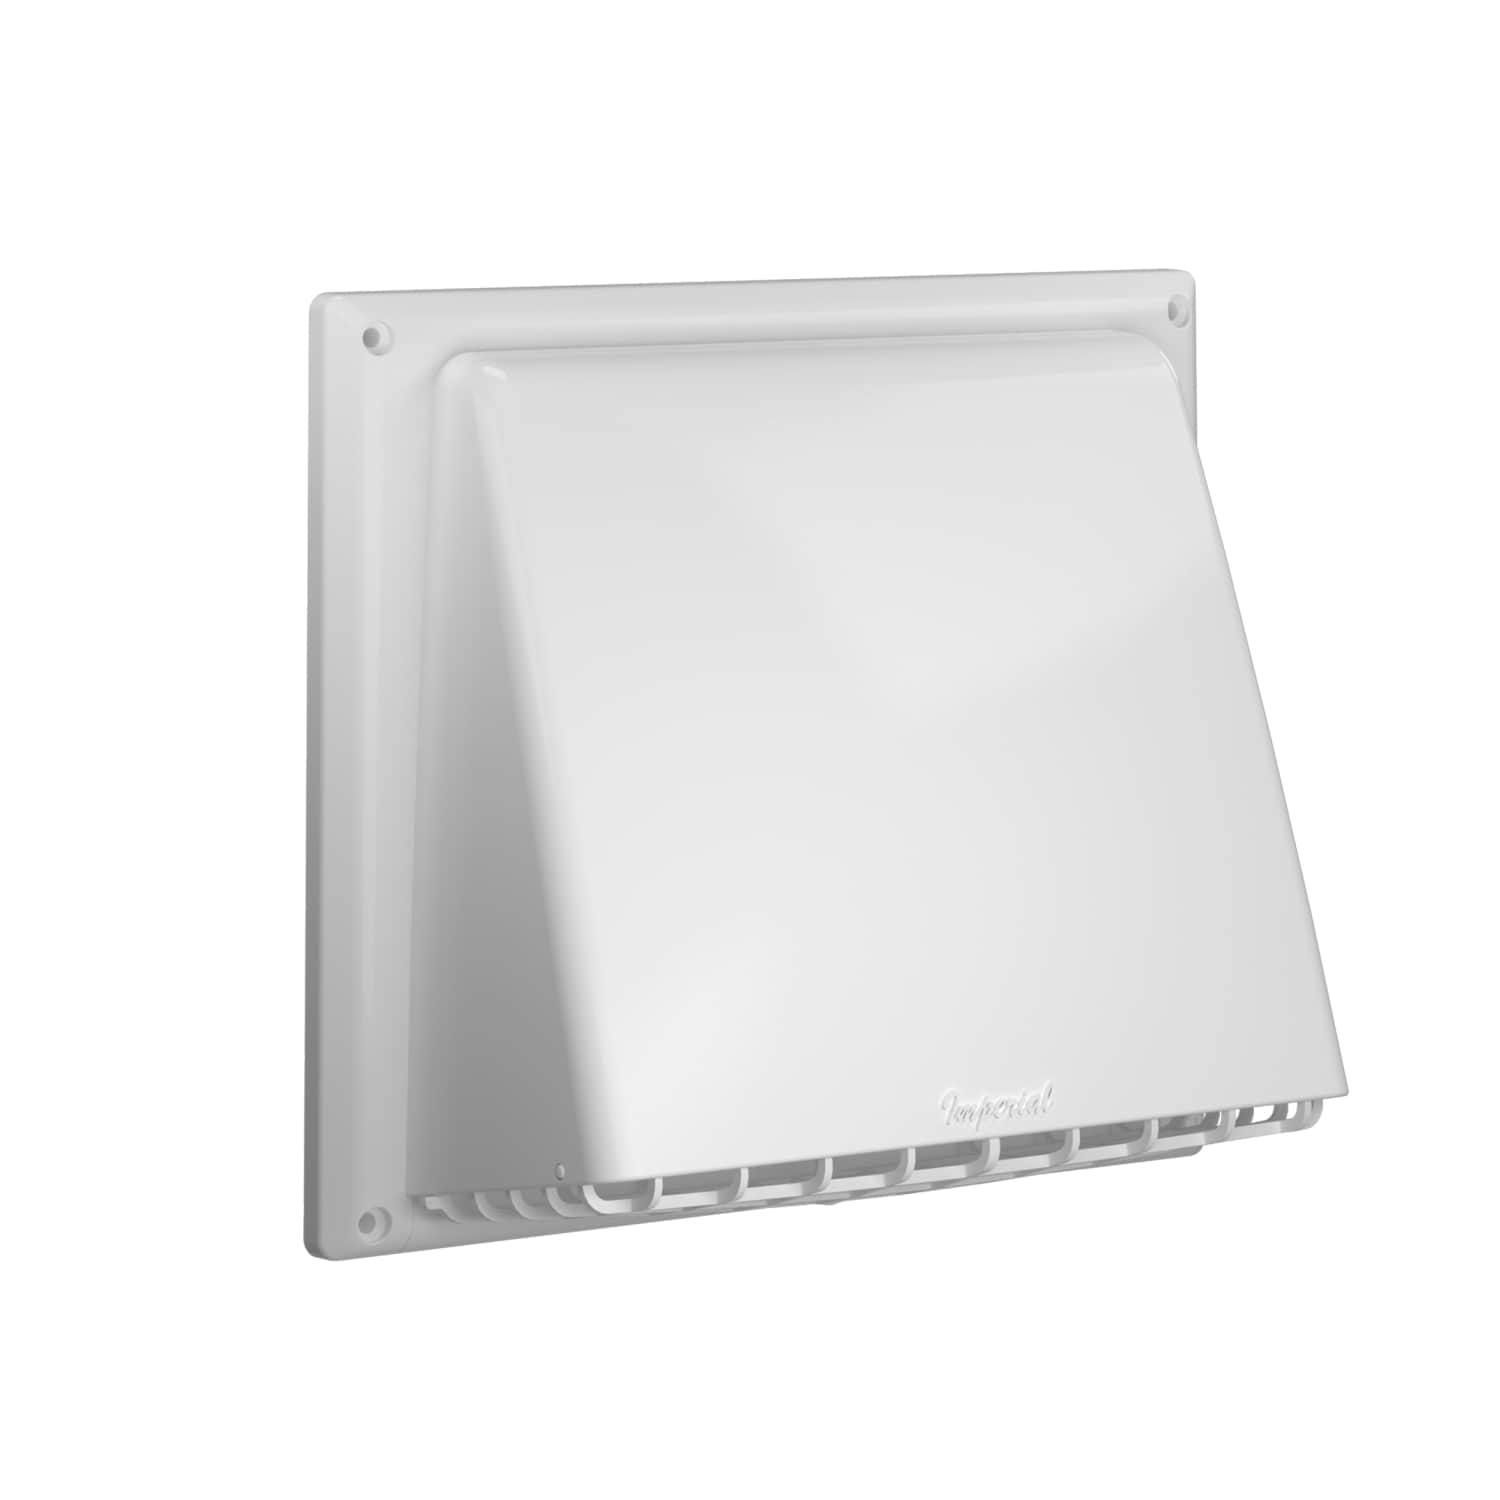 Imperial 6 Louvered/Semi-Ridgid Aluminum Range Hood Wall Vent Kit, White,  VT0170,  price tracker / tracking,  price history charts,   price watches,  price drop alerts